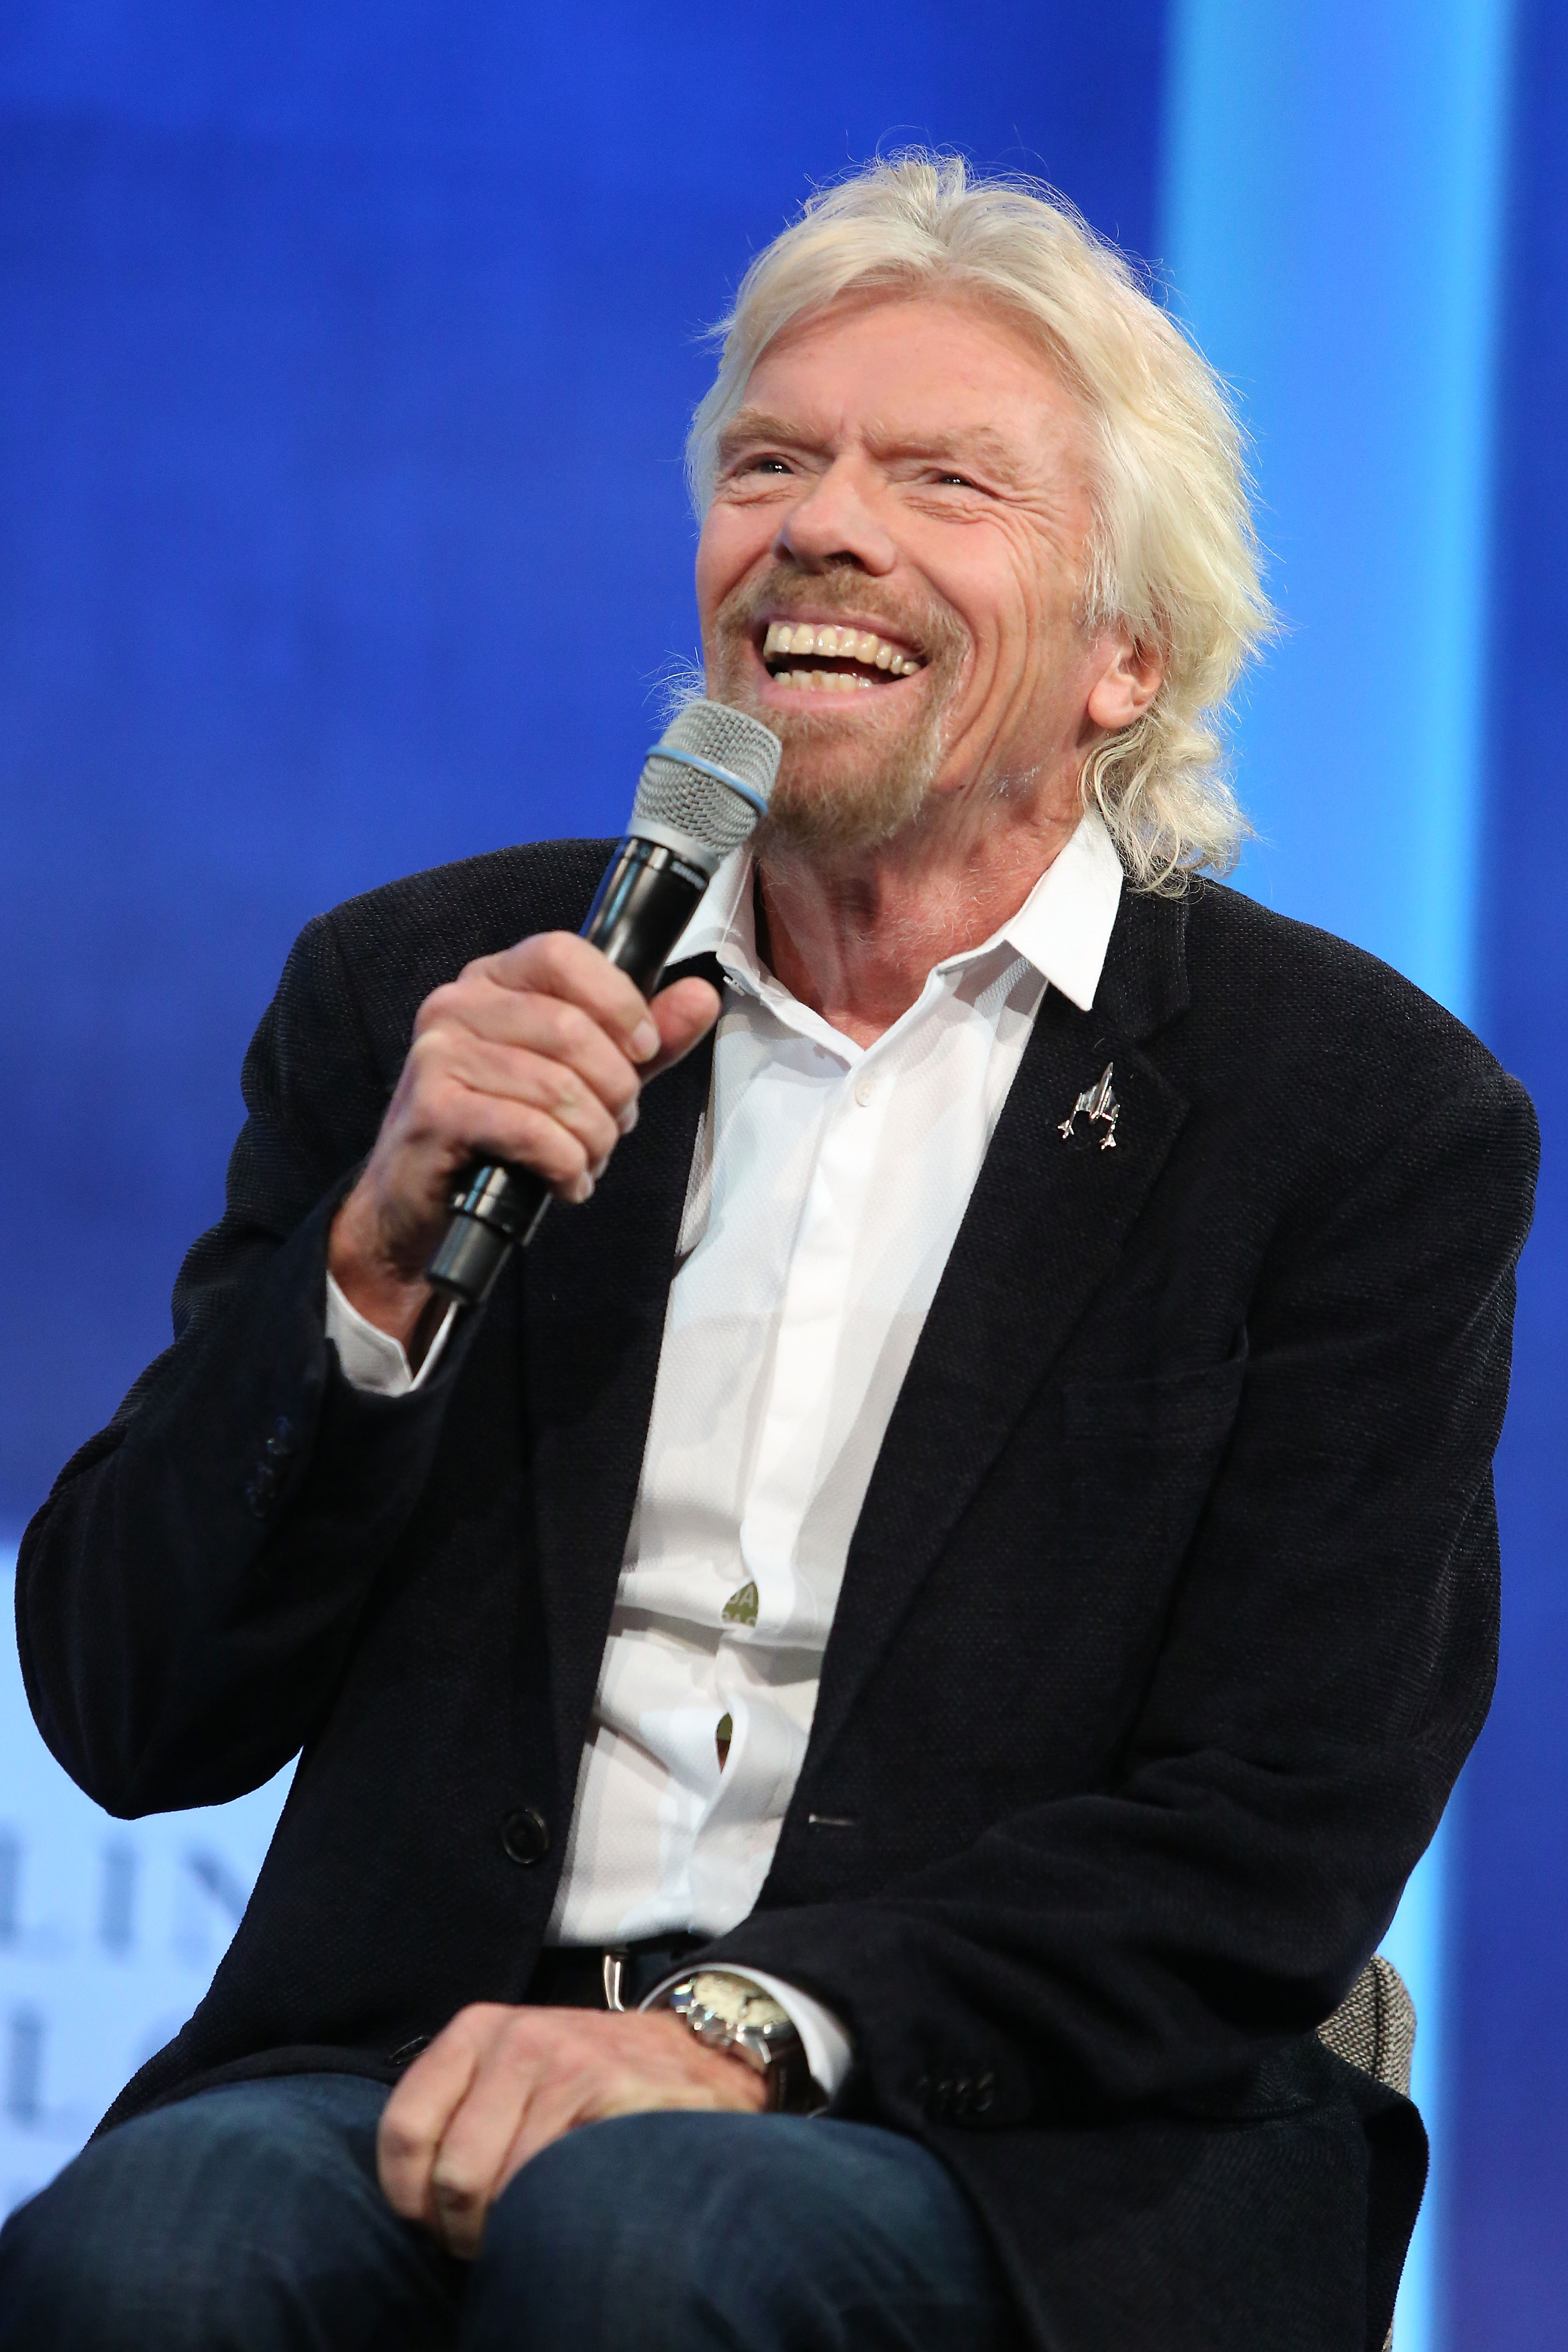 Richard Branson at the 2015 Clinton Global Initiative Annual Meeting in New York City on Sept. 28, 2015.